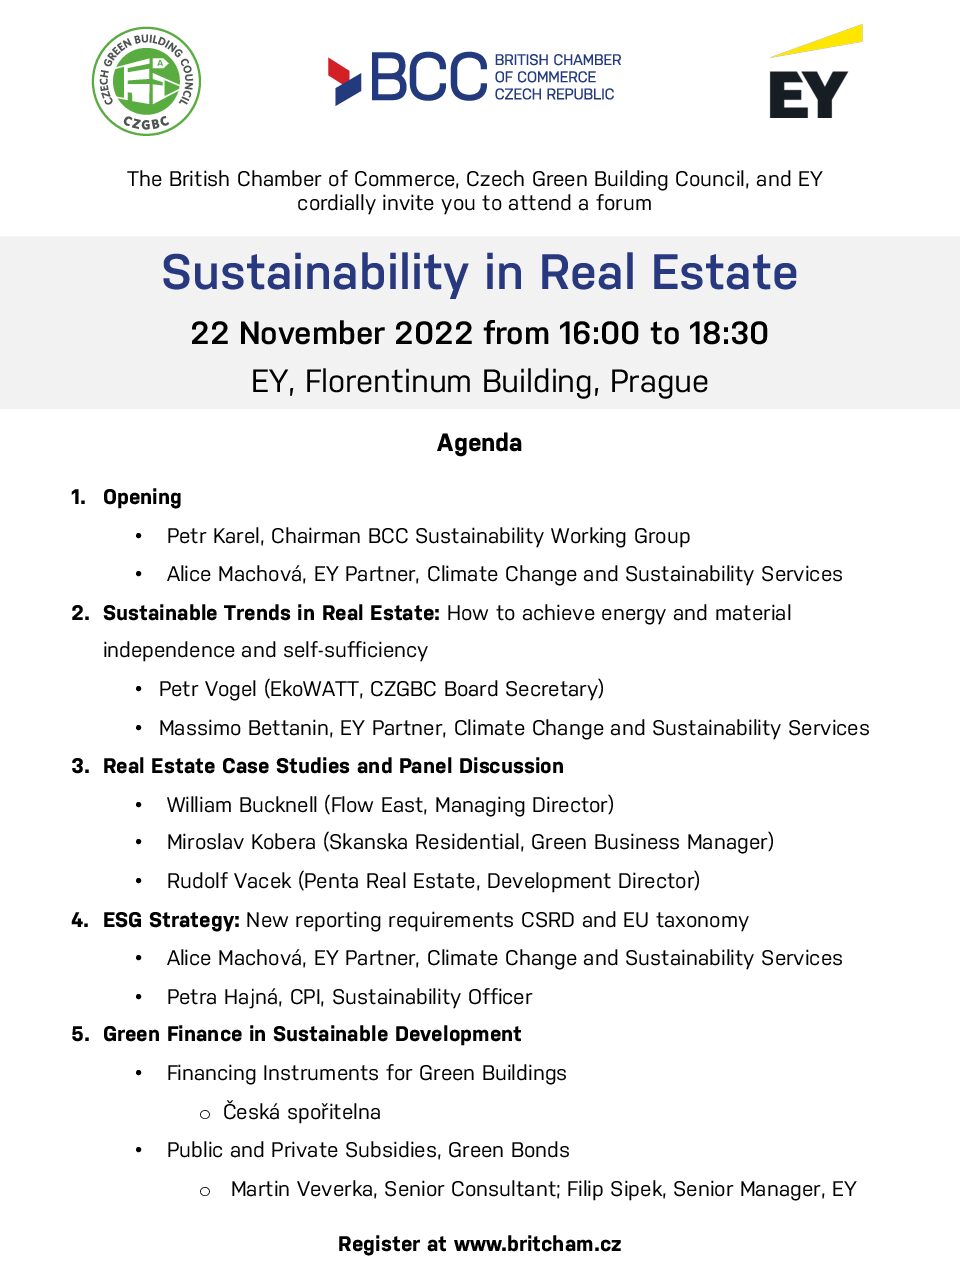 Event on Sustainability in Real Estate topic